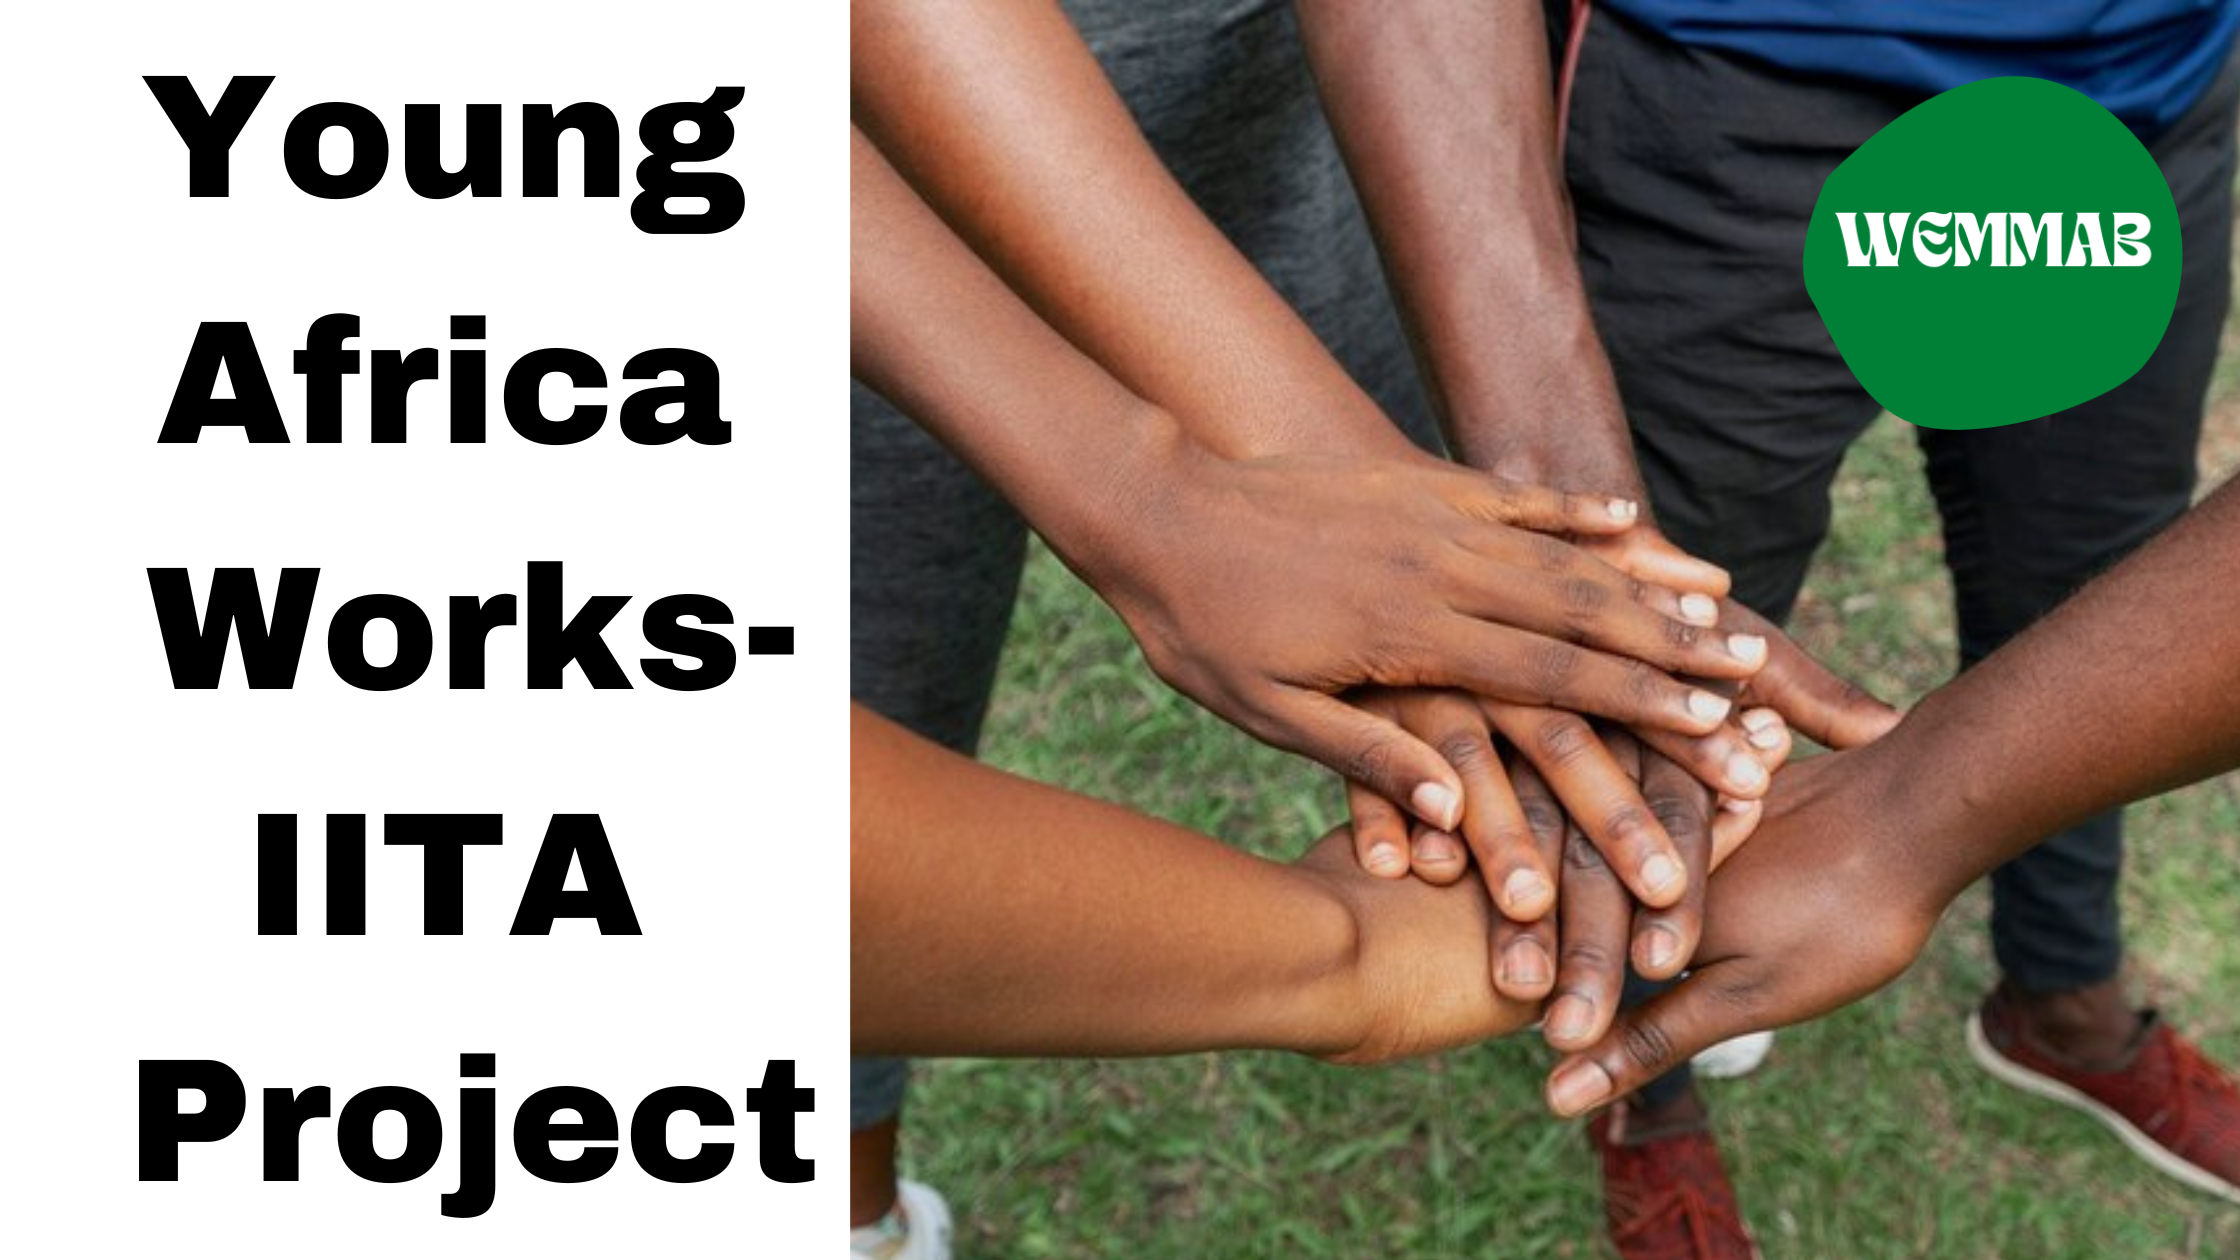 The Young Africa Works-IITA project